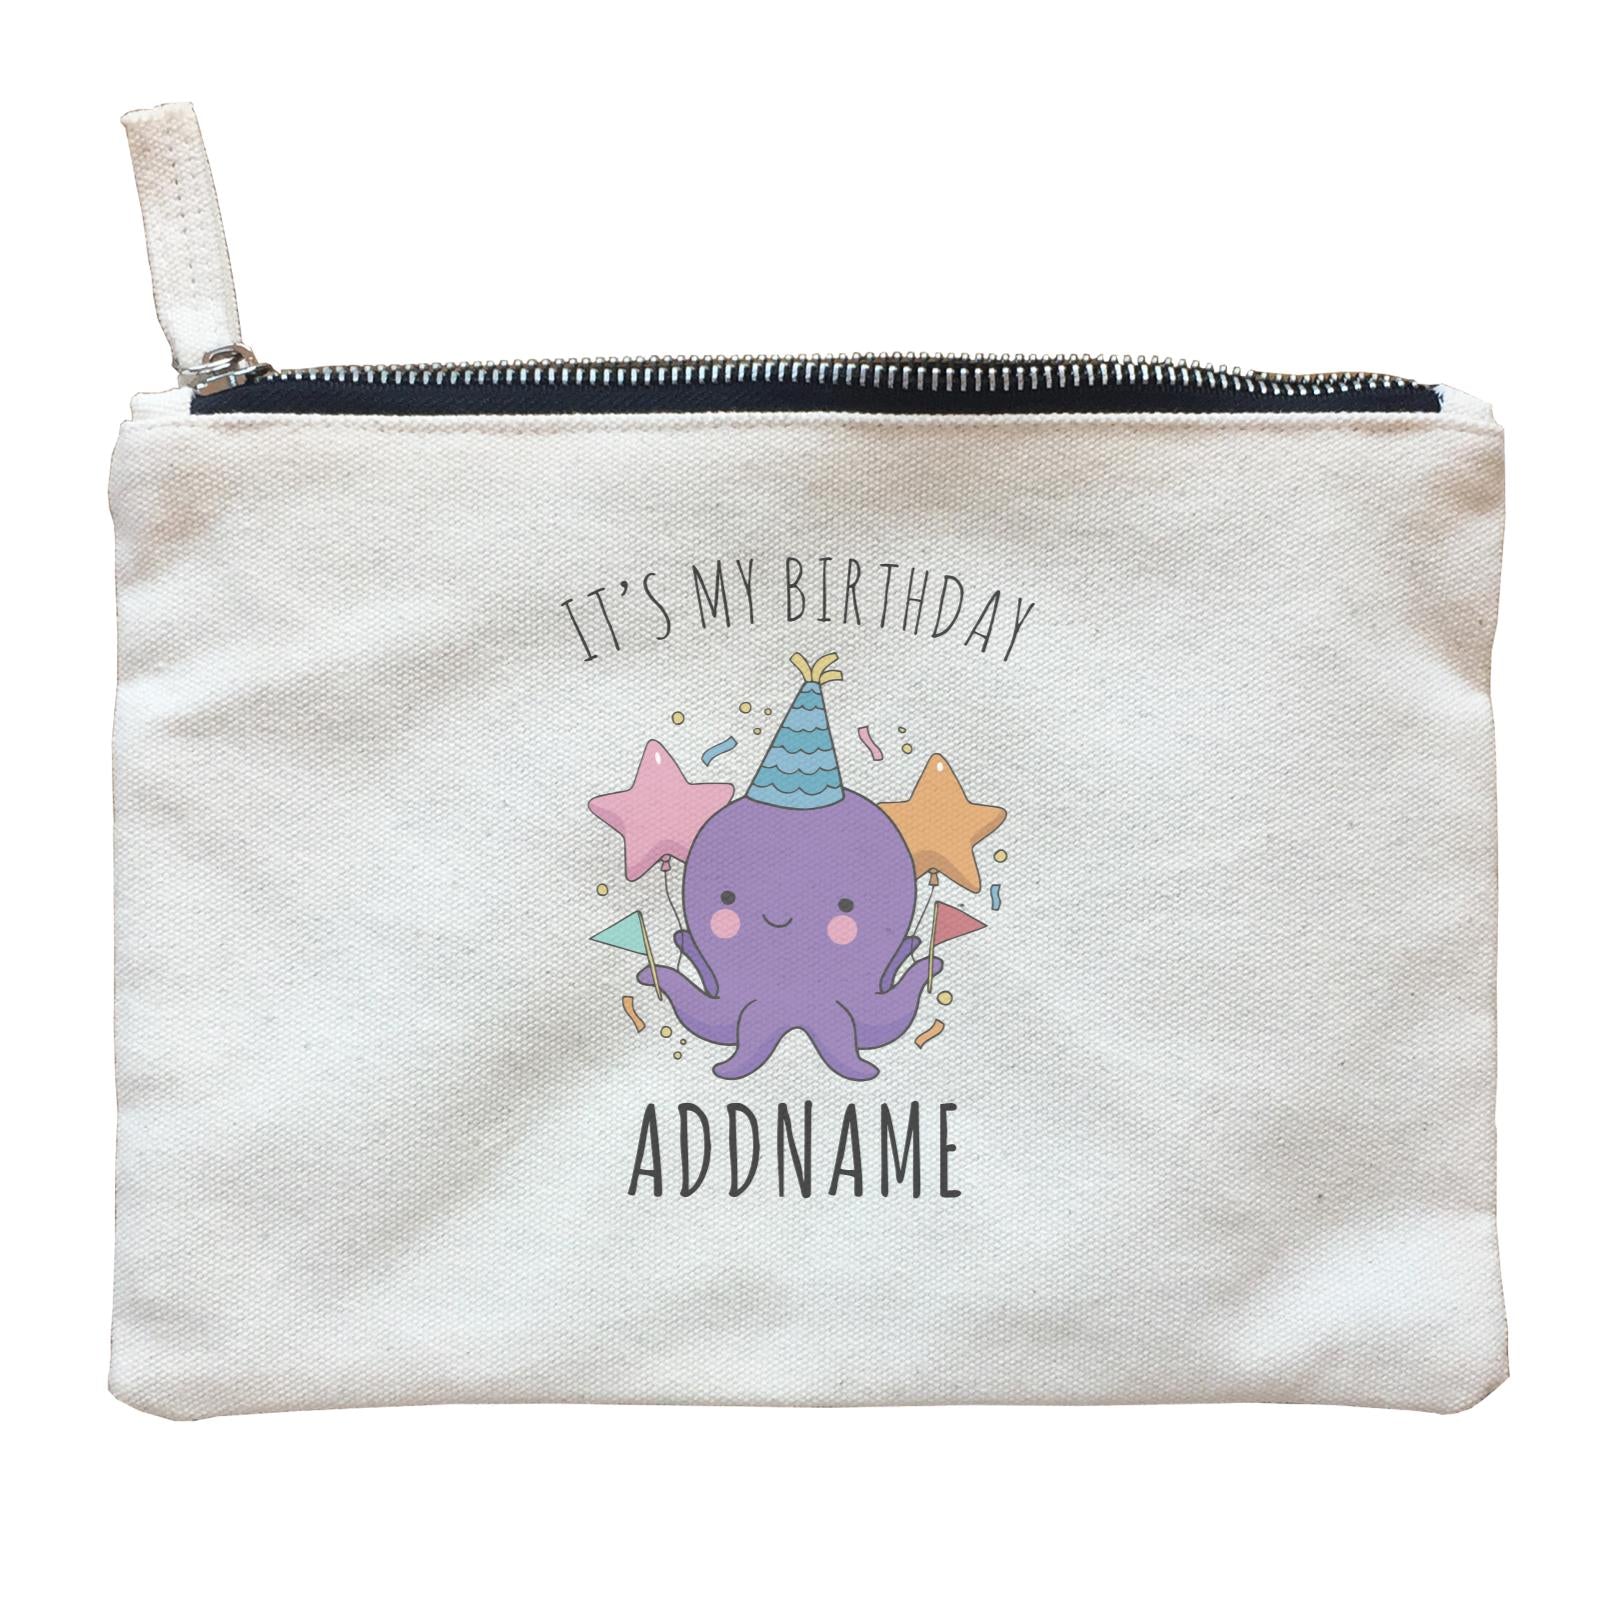 Birthday Sketch Animals Octopus with Flags It's My Birthday Addname Zipper Pouch